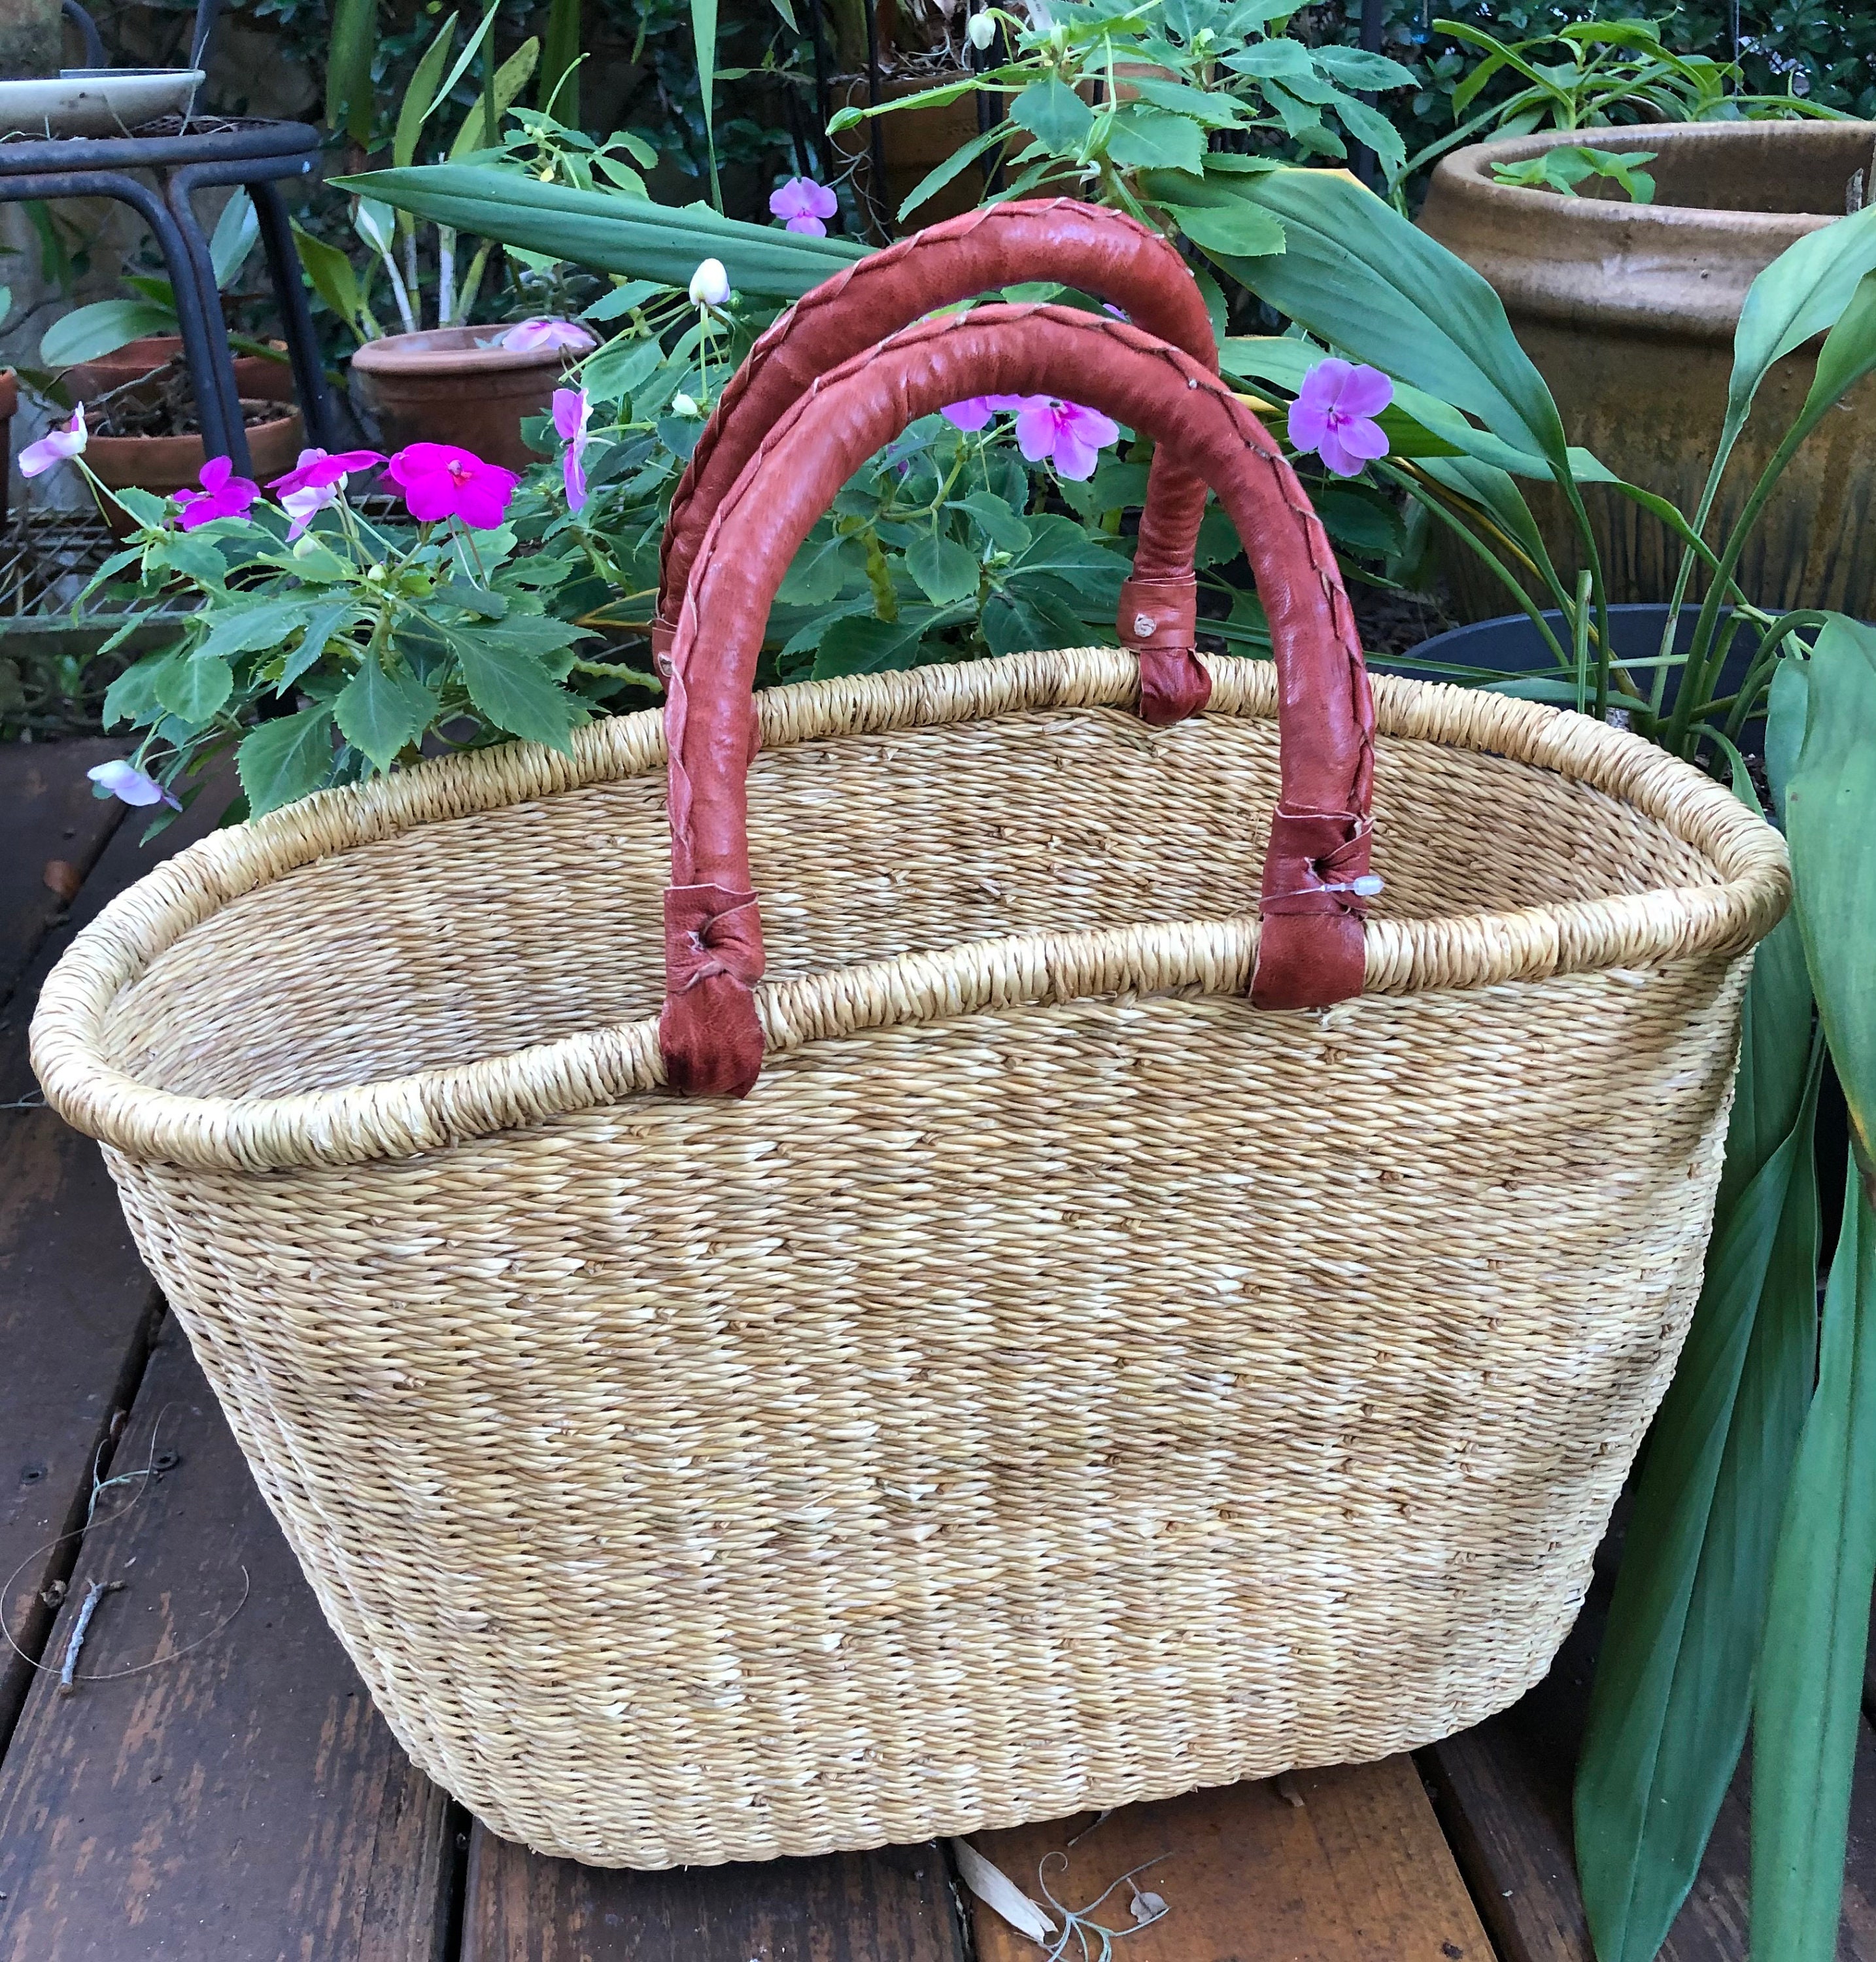 NEW Tapered Bicycle Basket Bolga Basket Small Front 